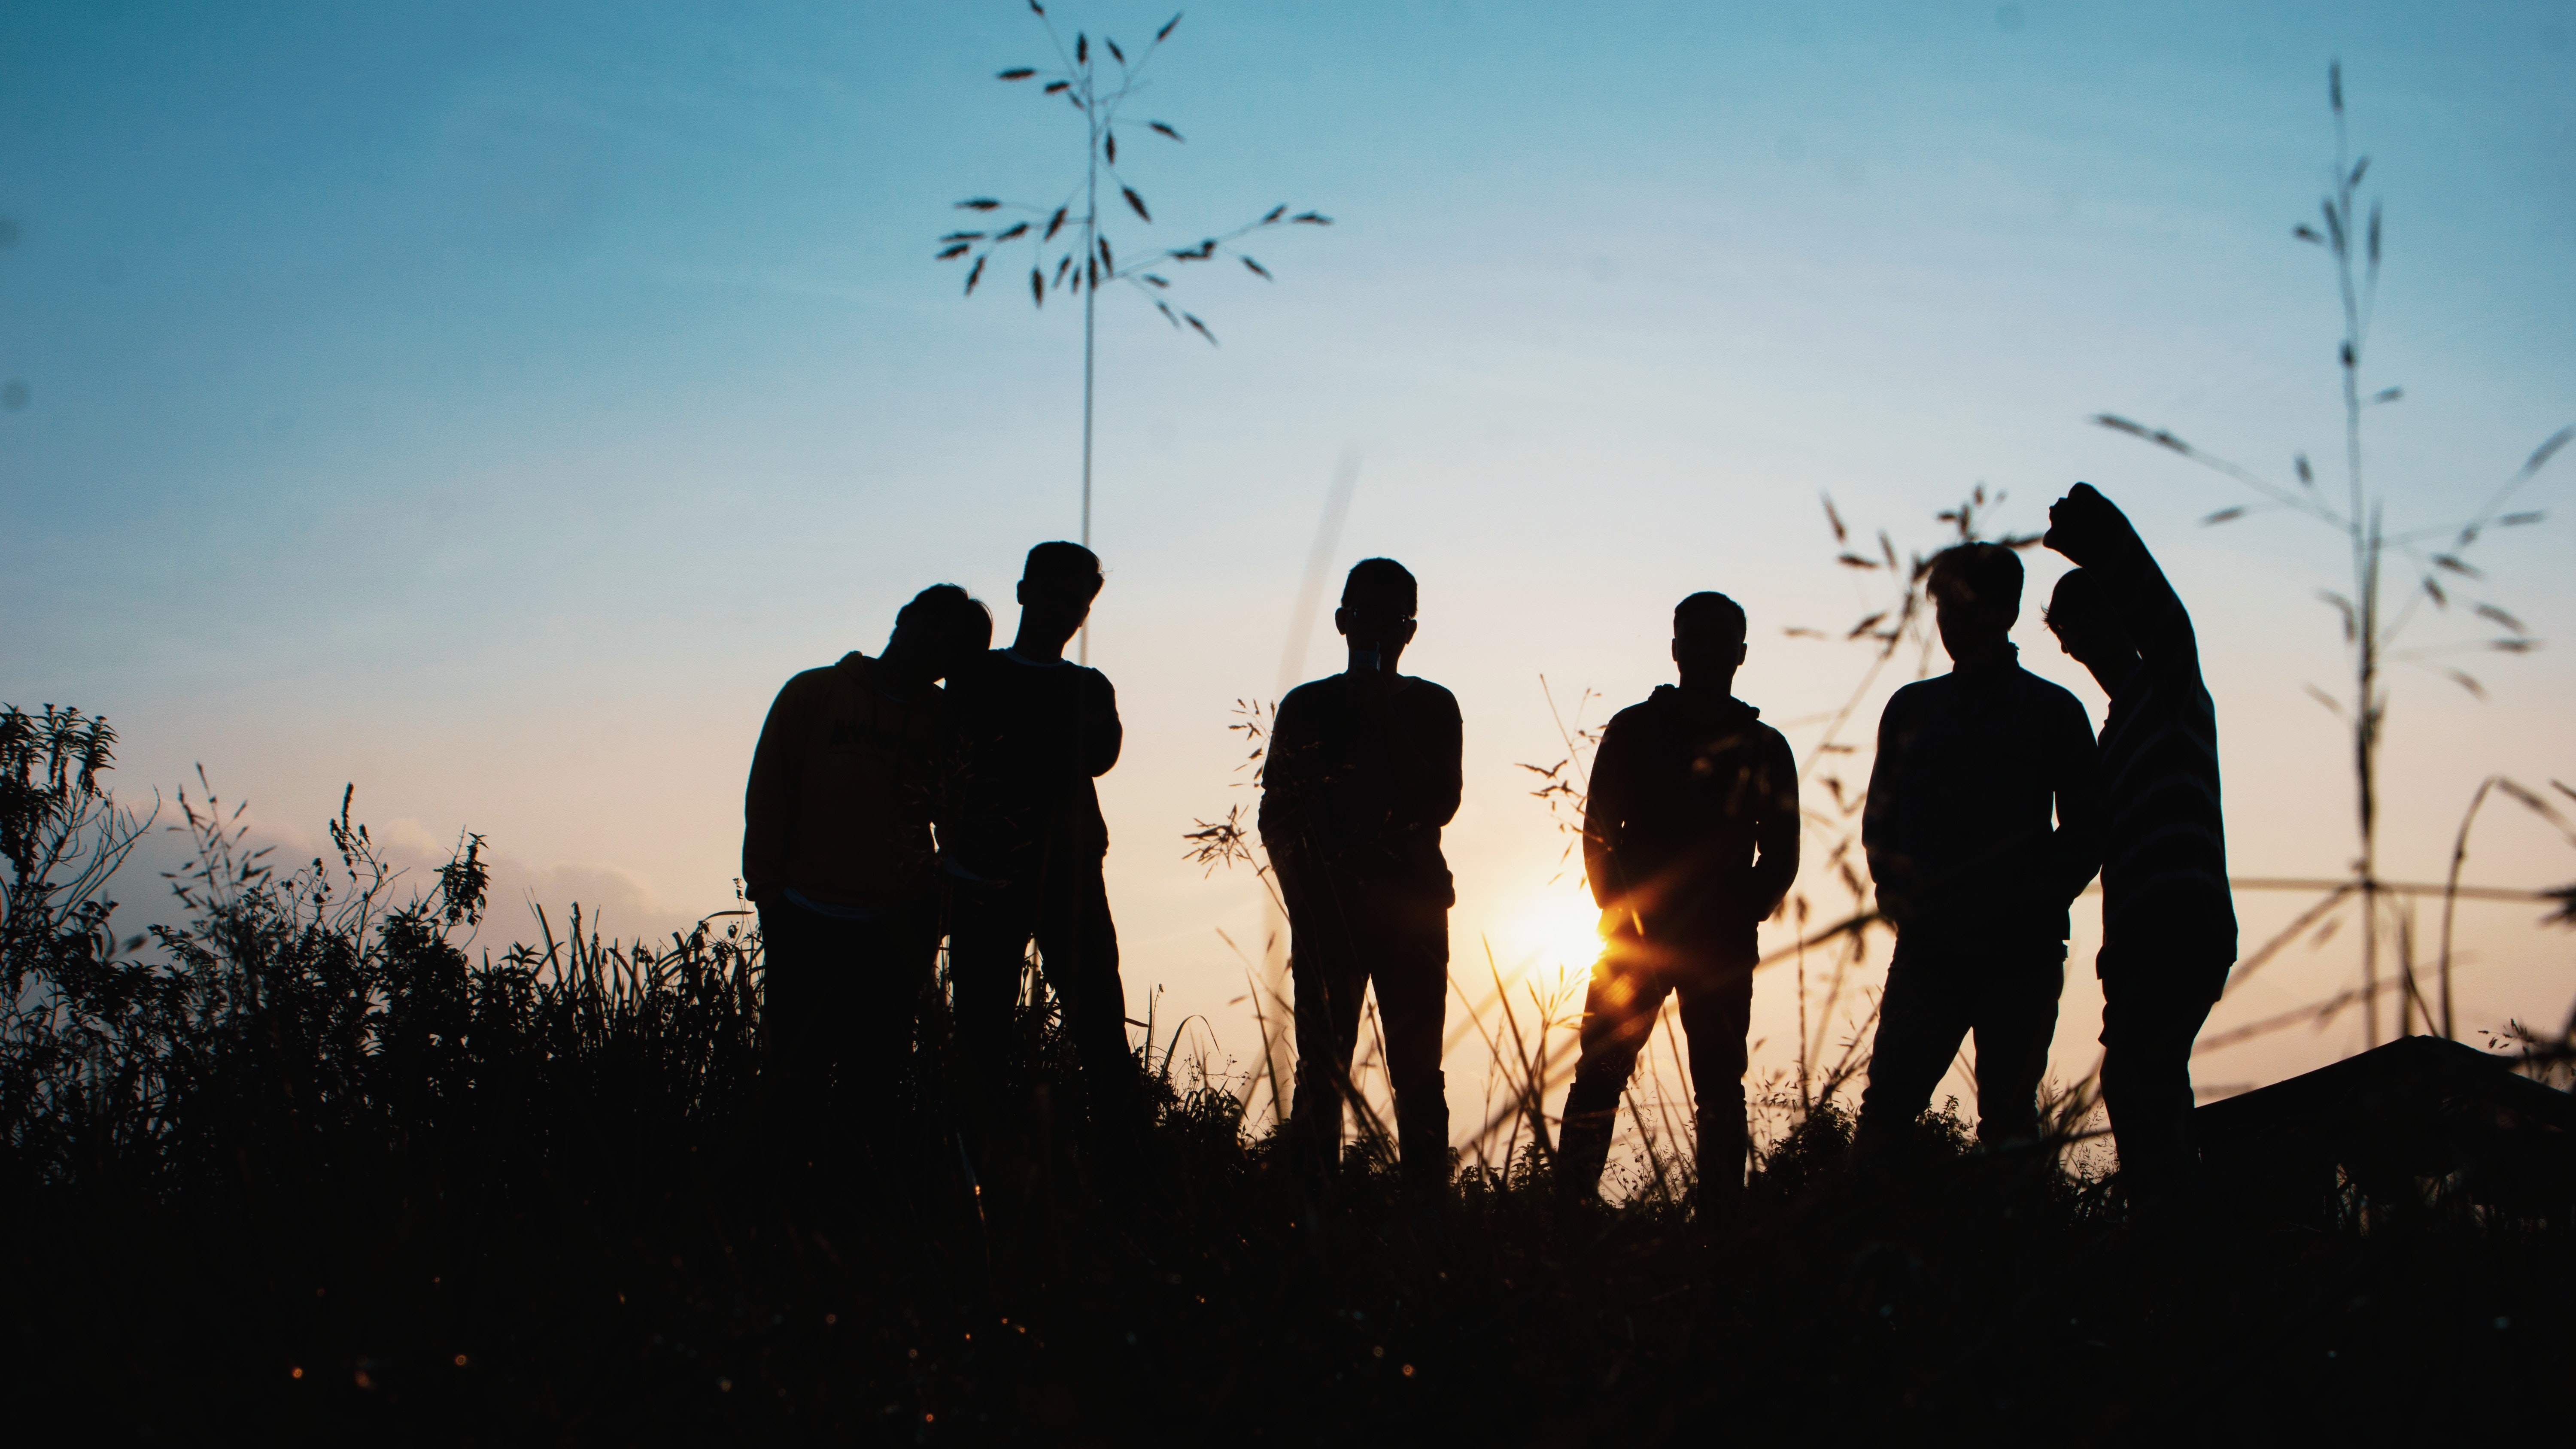 A group of teenagers stand silhouetted against a blue sky.